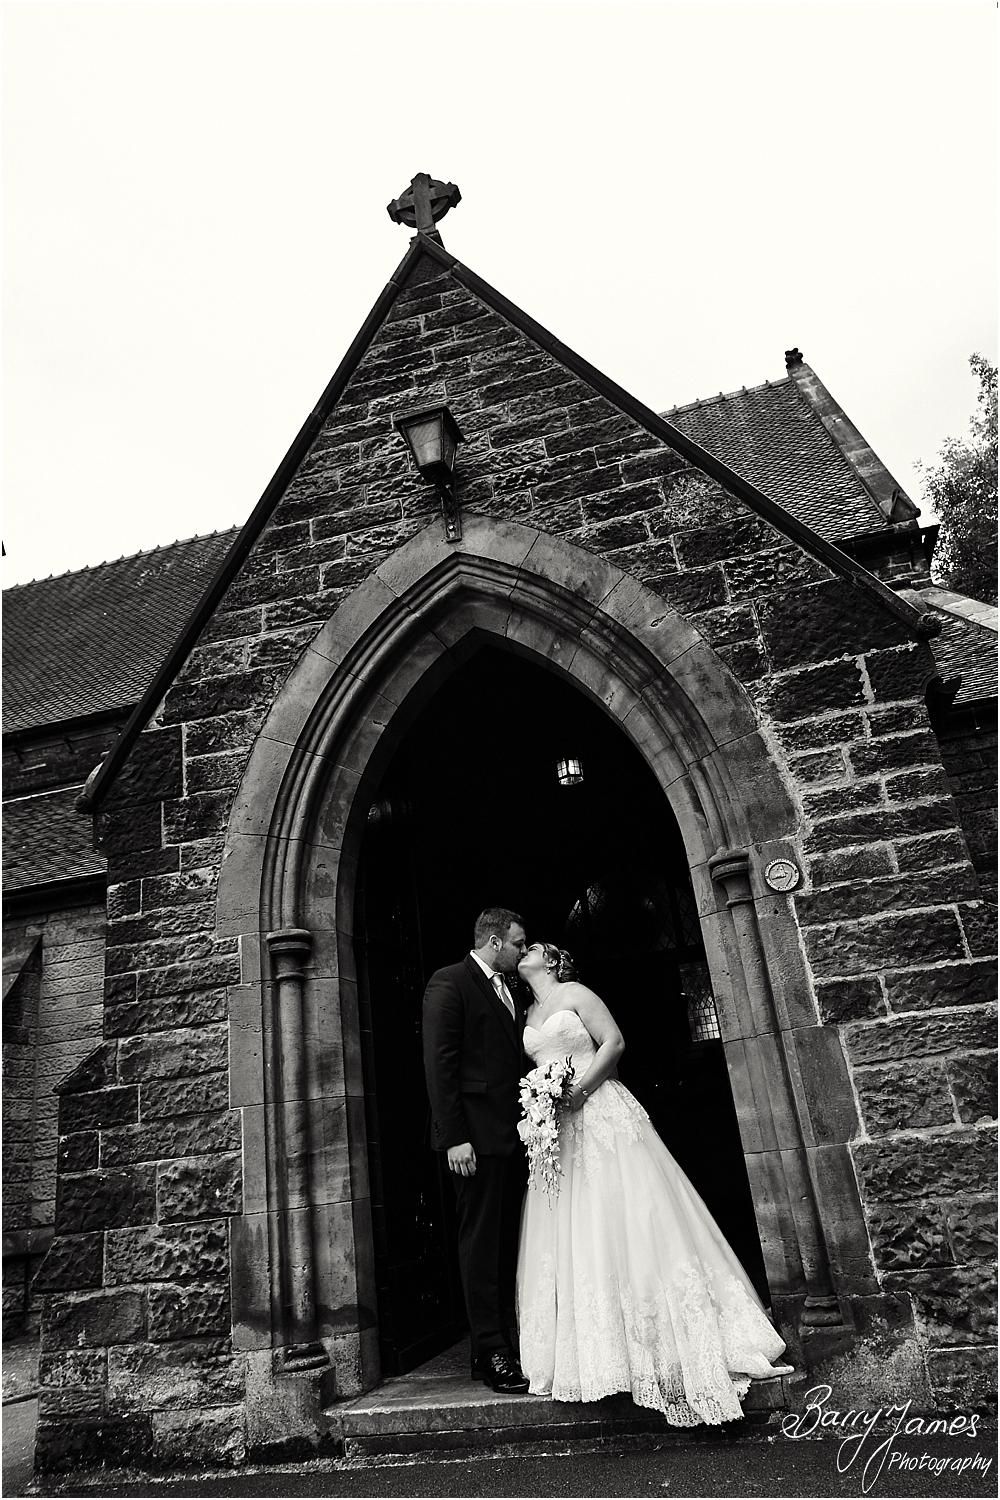 Creative portraits of the newly married couple of the doorway at St Marks Church in Great Wyrley by Cannock Wedding Photographer Barry James